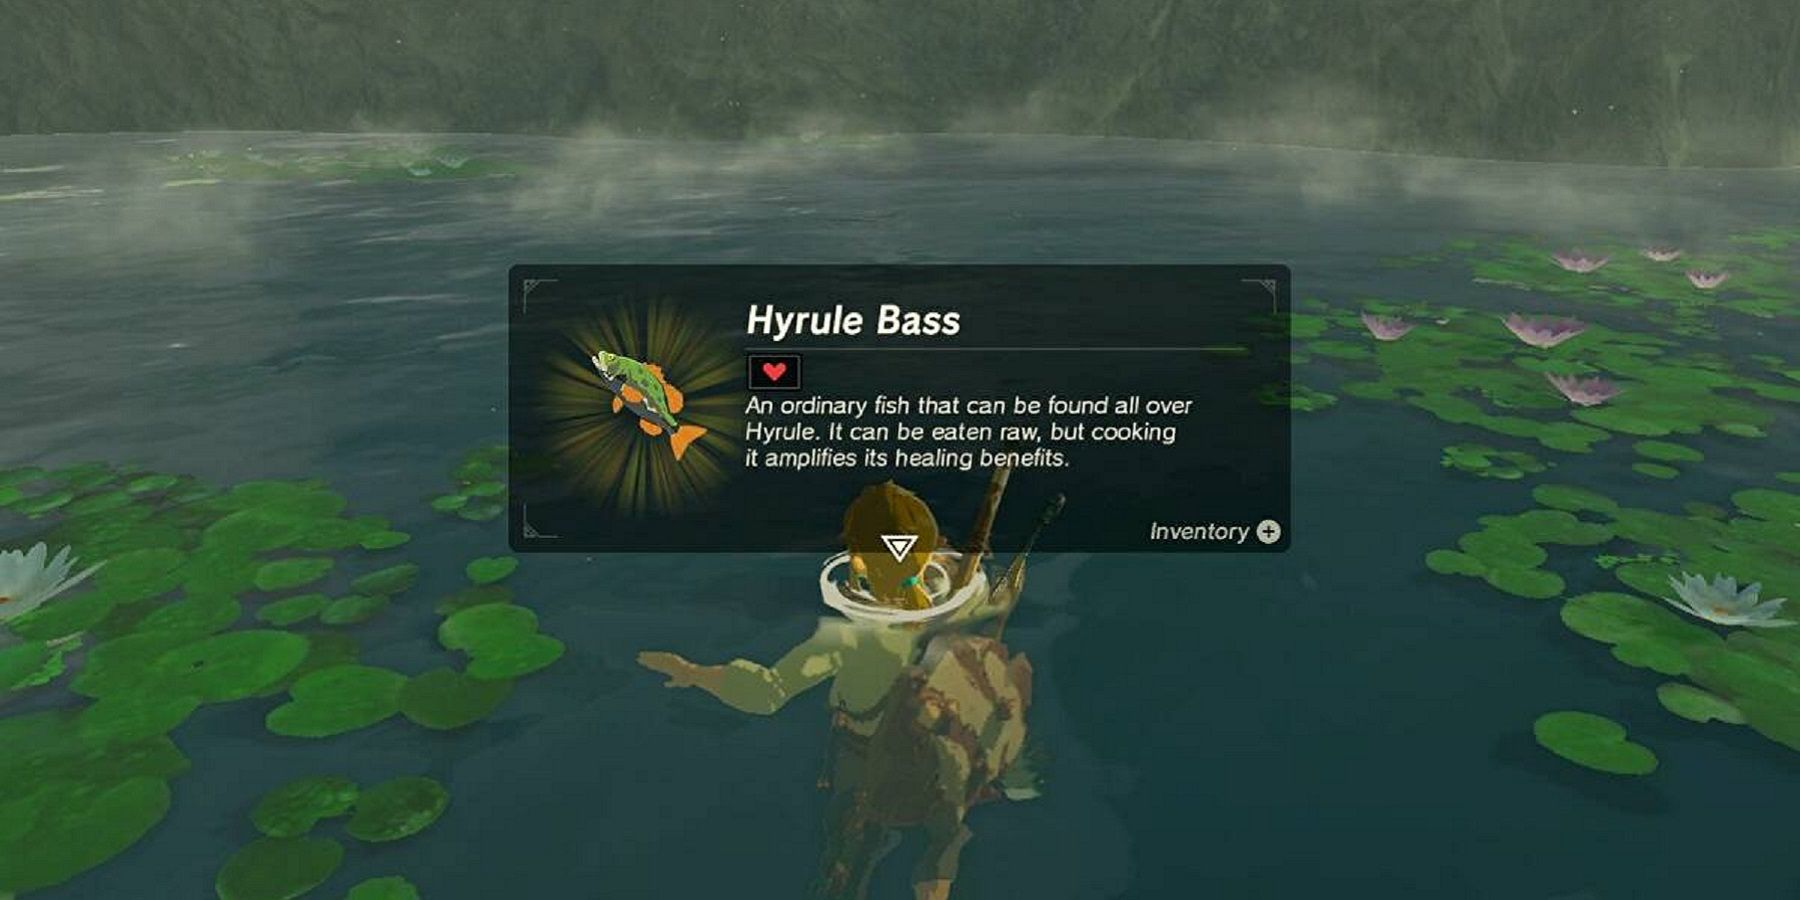 Link catching a Hyrule Bass in The Legend of Zelda Breath of the Wild